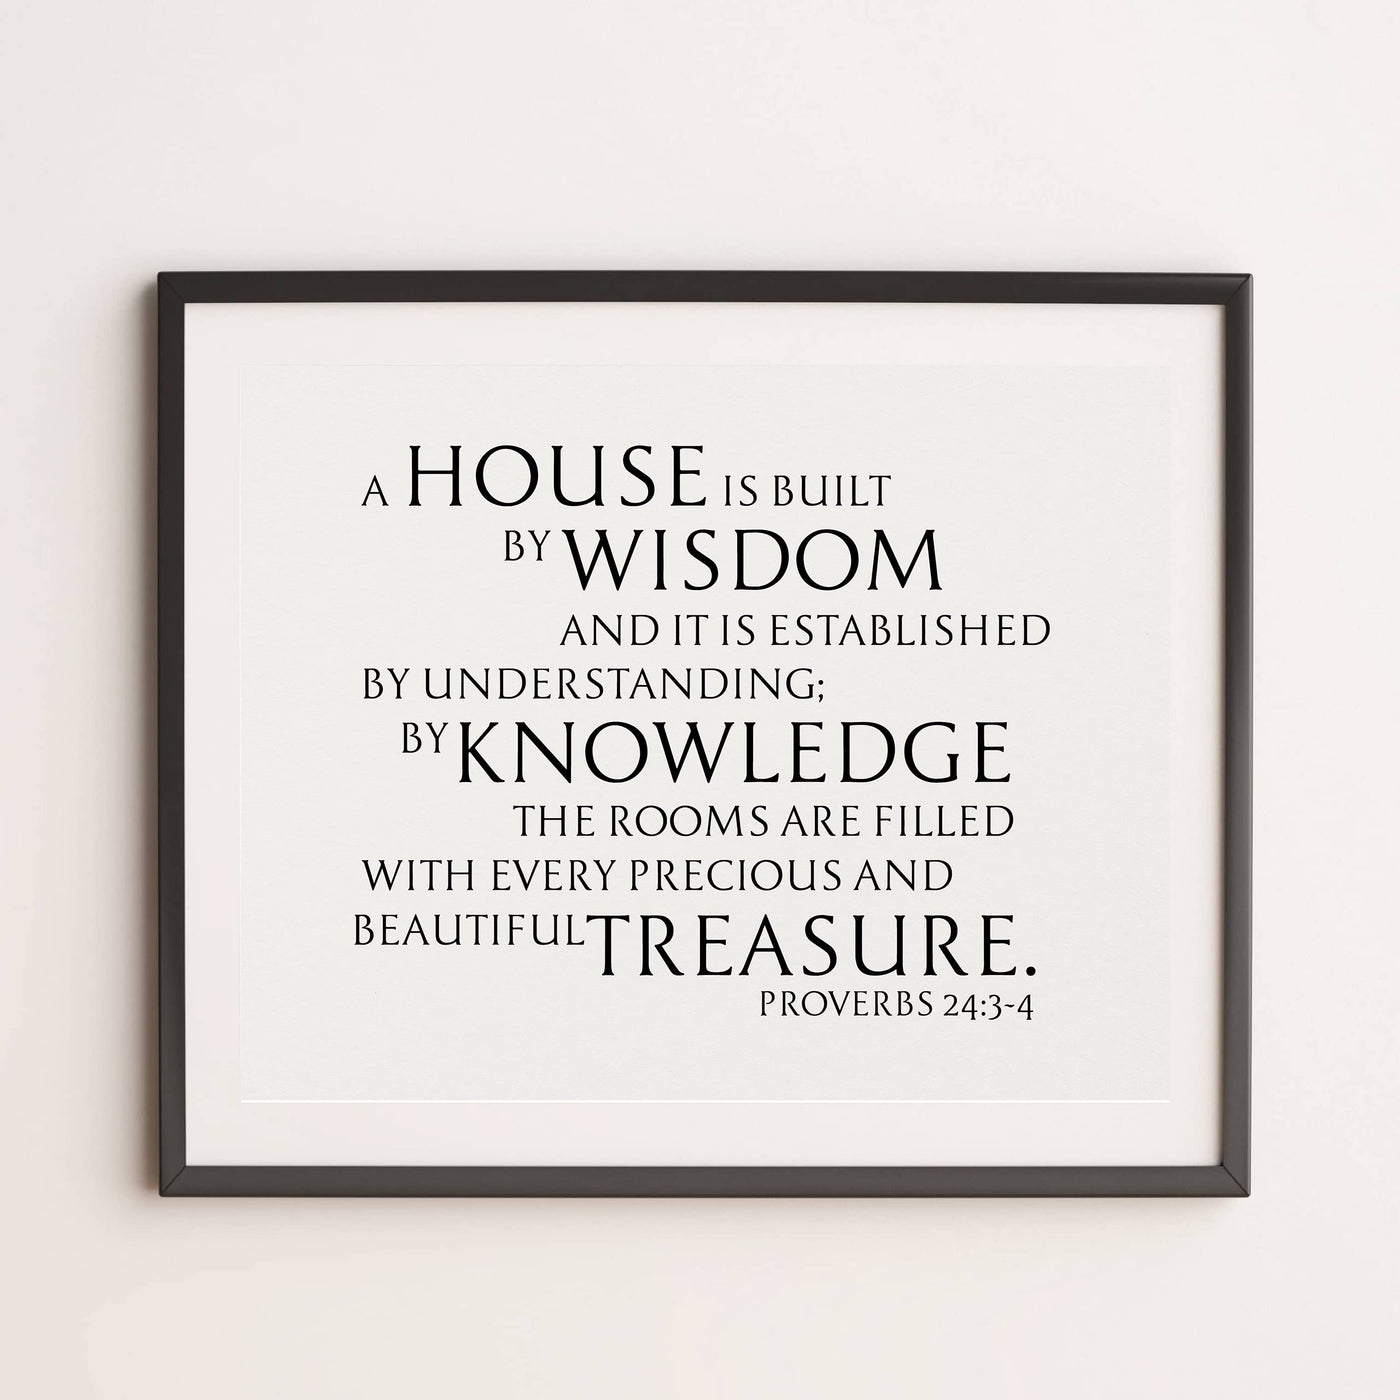 By Wisdom a House Is Built- Bible Verse Wall Art -14 x 11" Farmhouse Scripture Print -Ready to Frame. Inspirational Decoration for Home-Office-Church Decor. Great Religious Gift! Proverbs 24:3-4